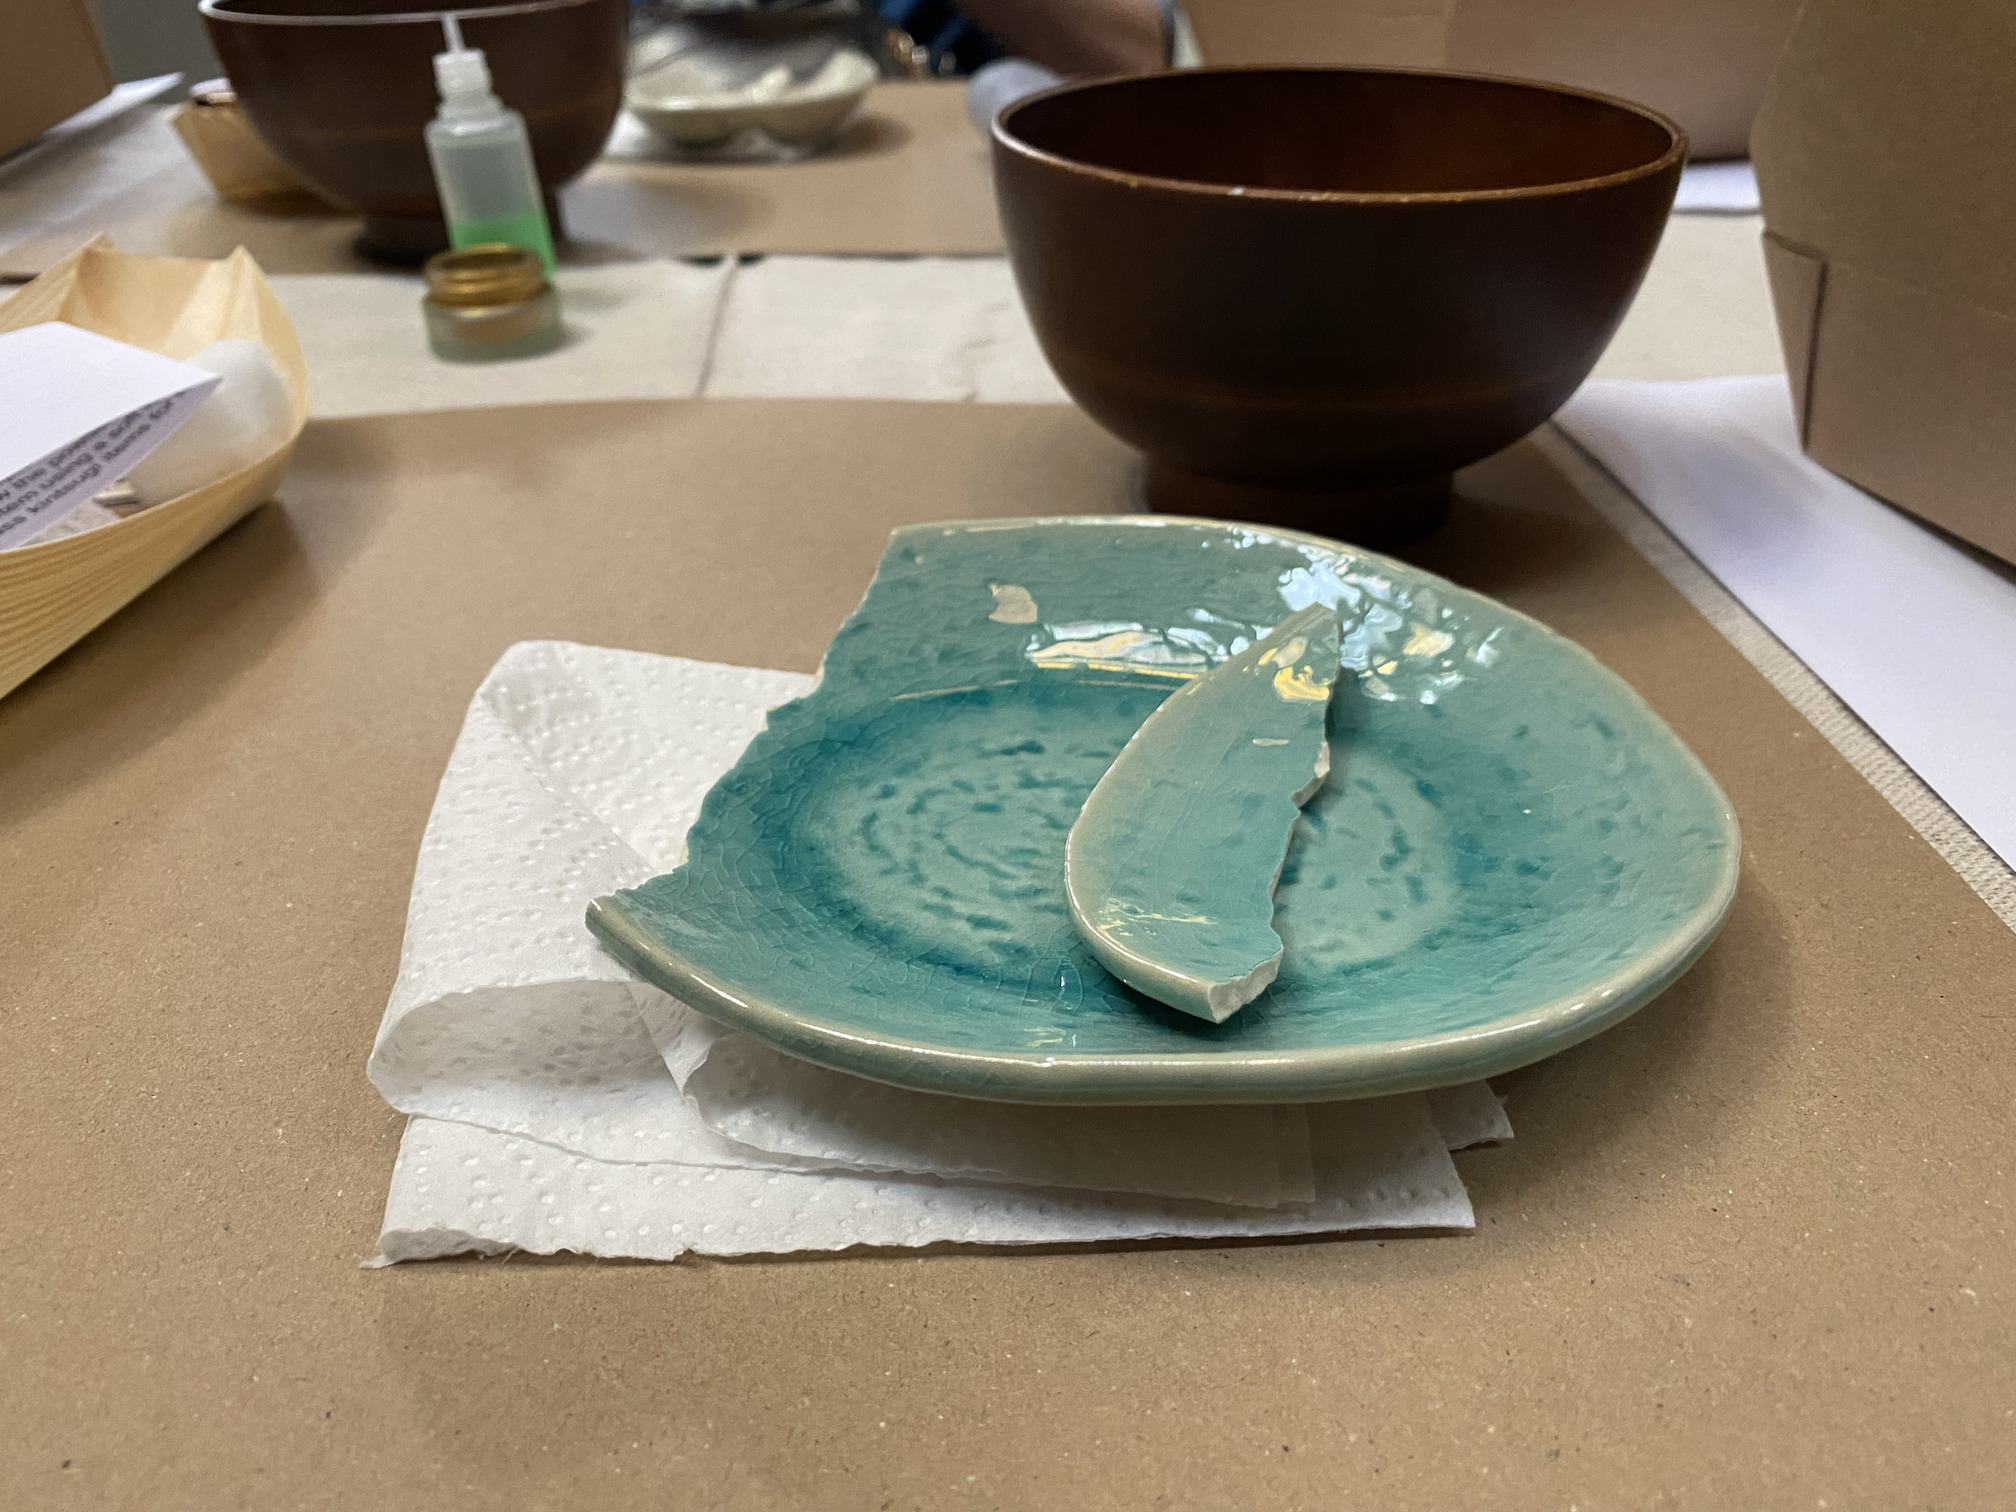 Broken dish, with sanded edges